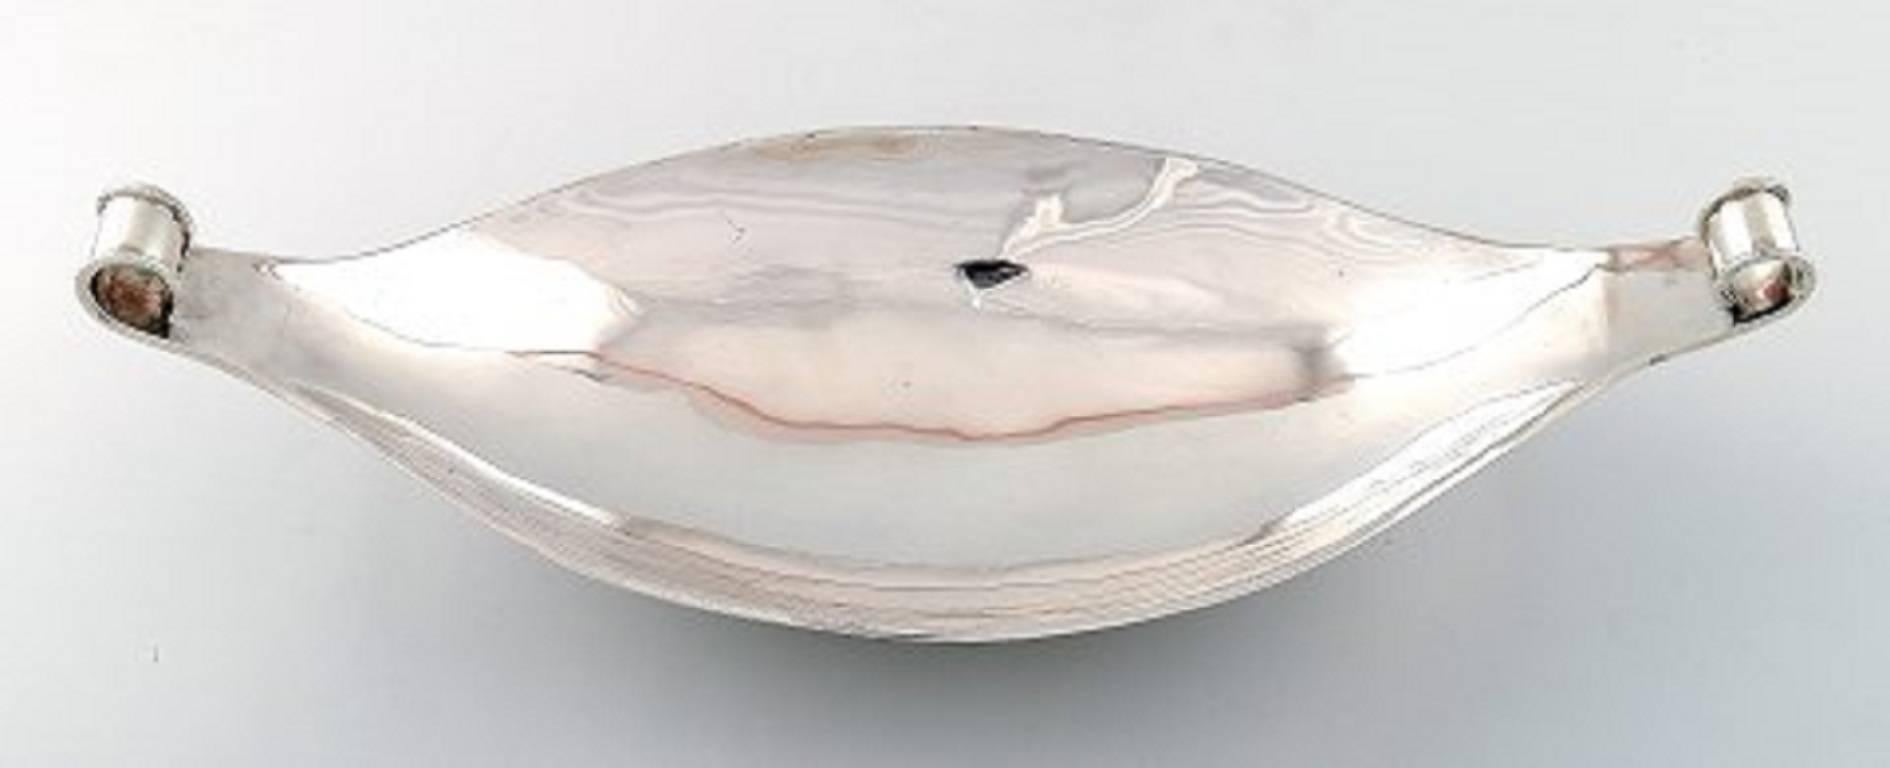 European Large Art Deco Centerpiece or Bowl in Sterling Silver, 1940s-1950s